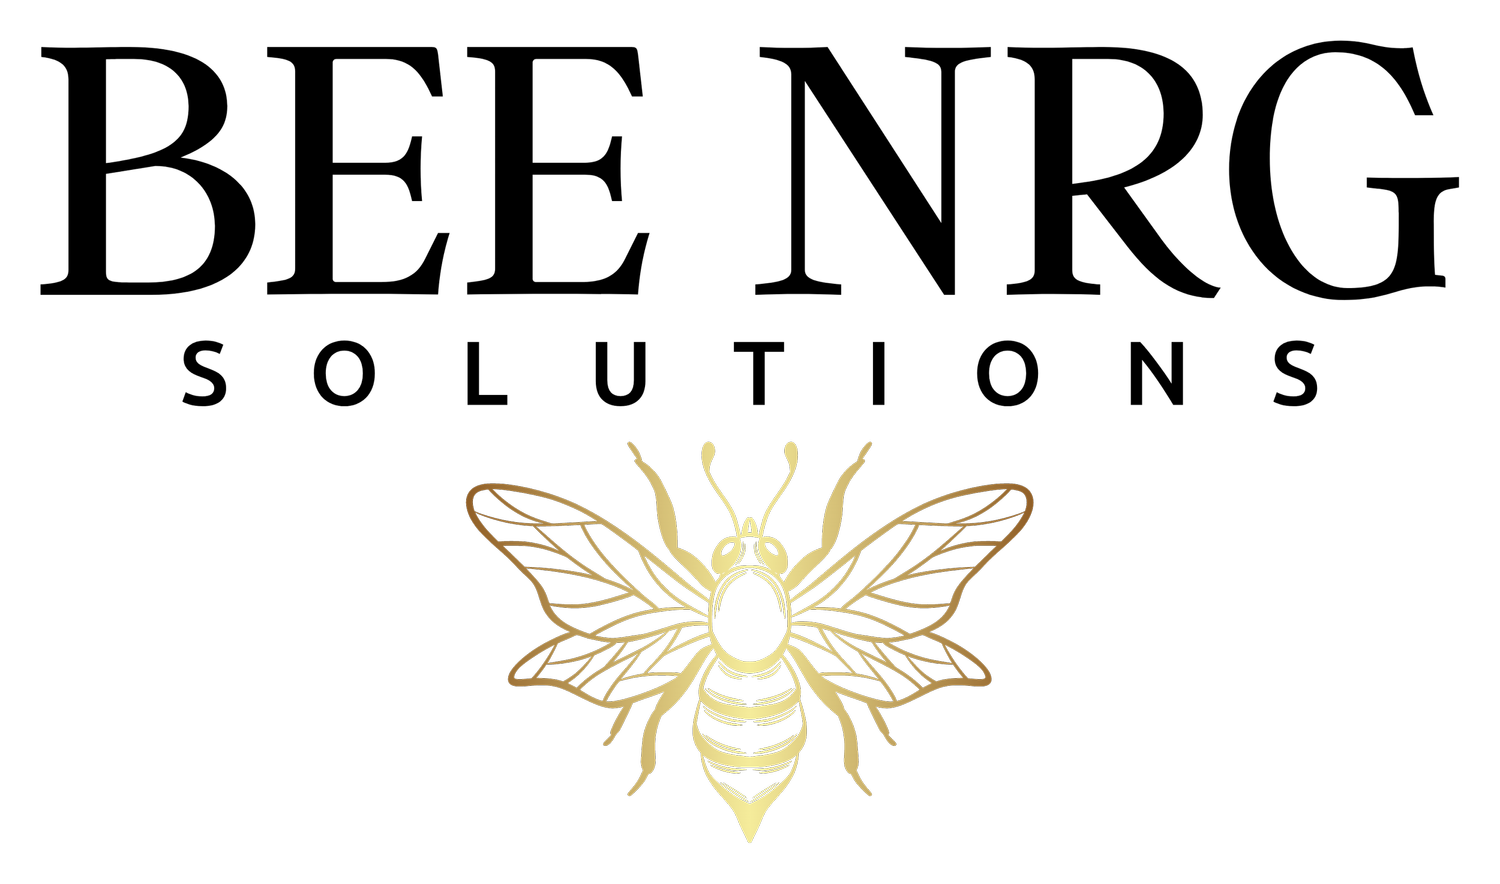 BEE NRG Solutions